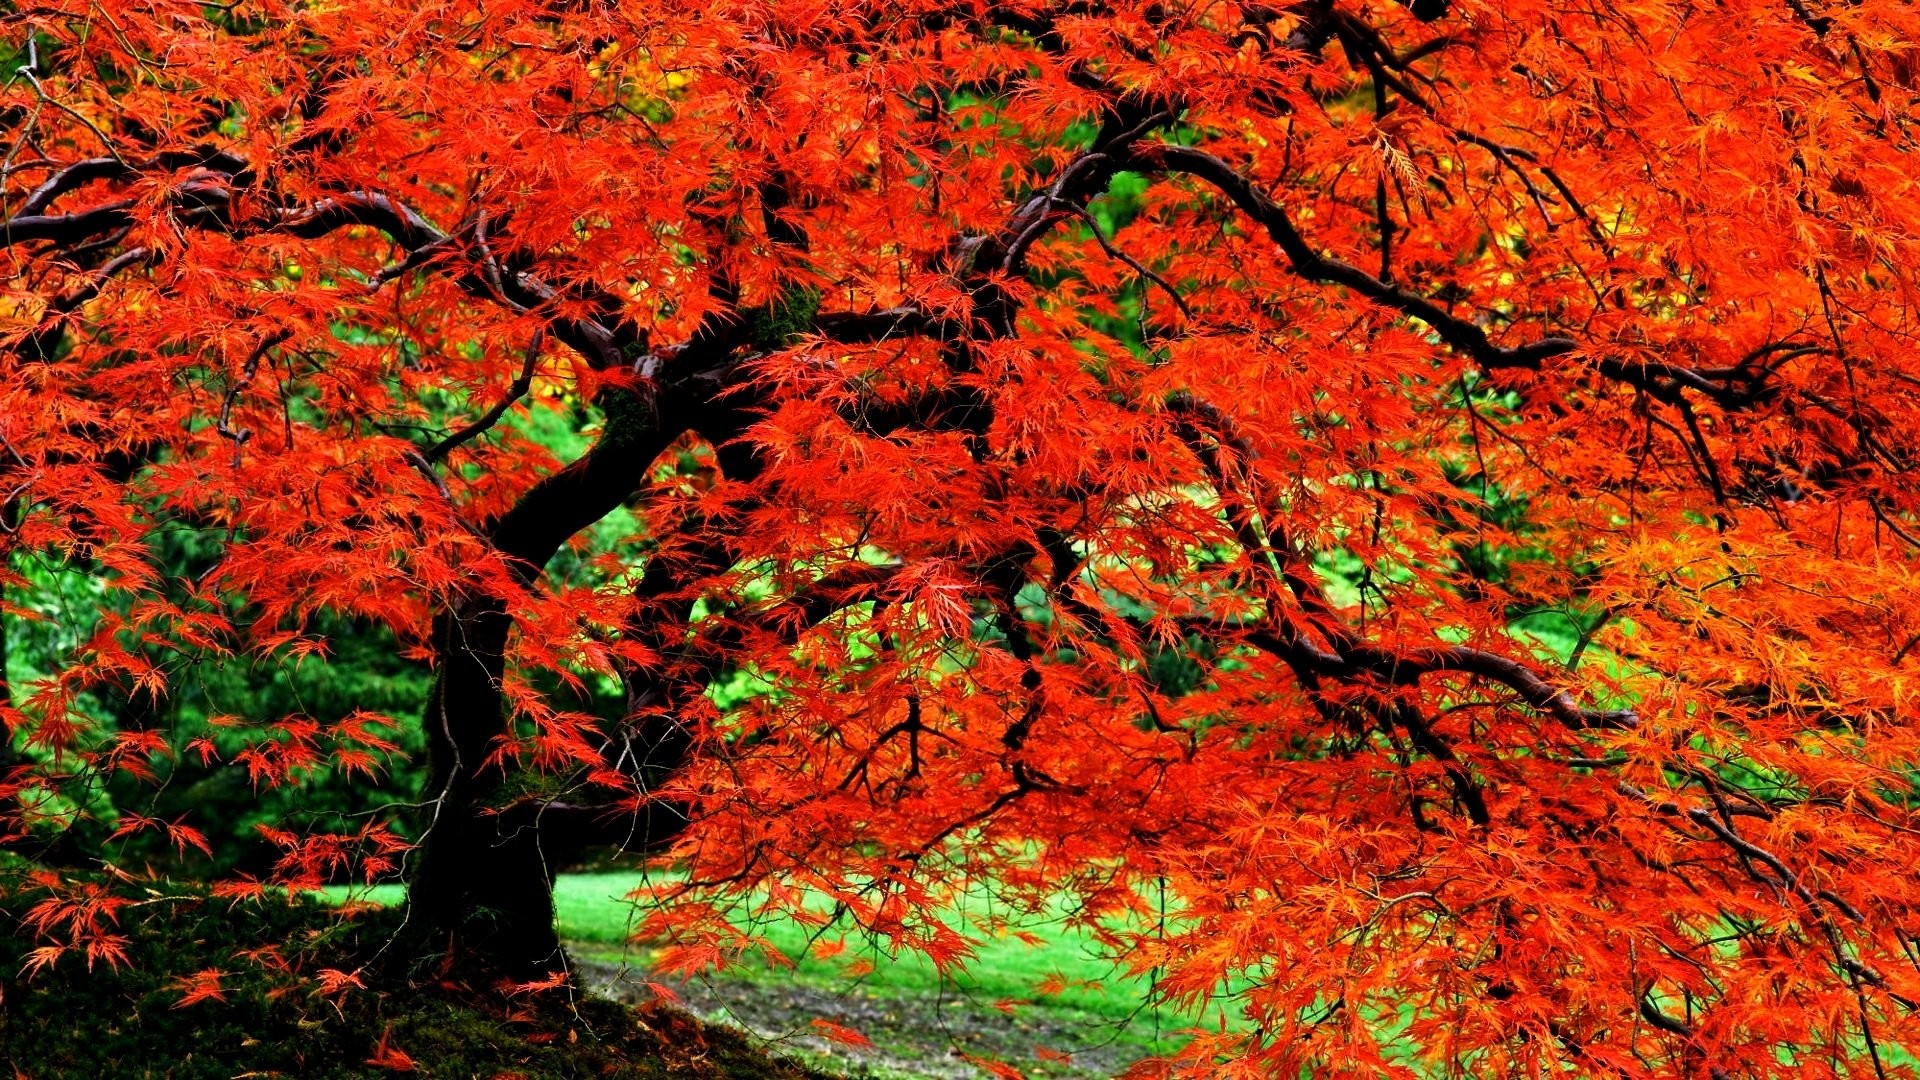 1920x1080 Earth - Tree Nature Fall Foliage Red Close-Up Leaf Garden Japanese Wallpaper